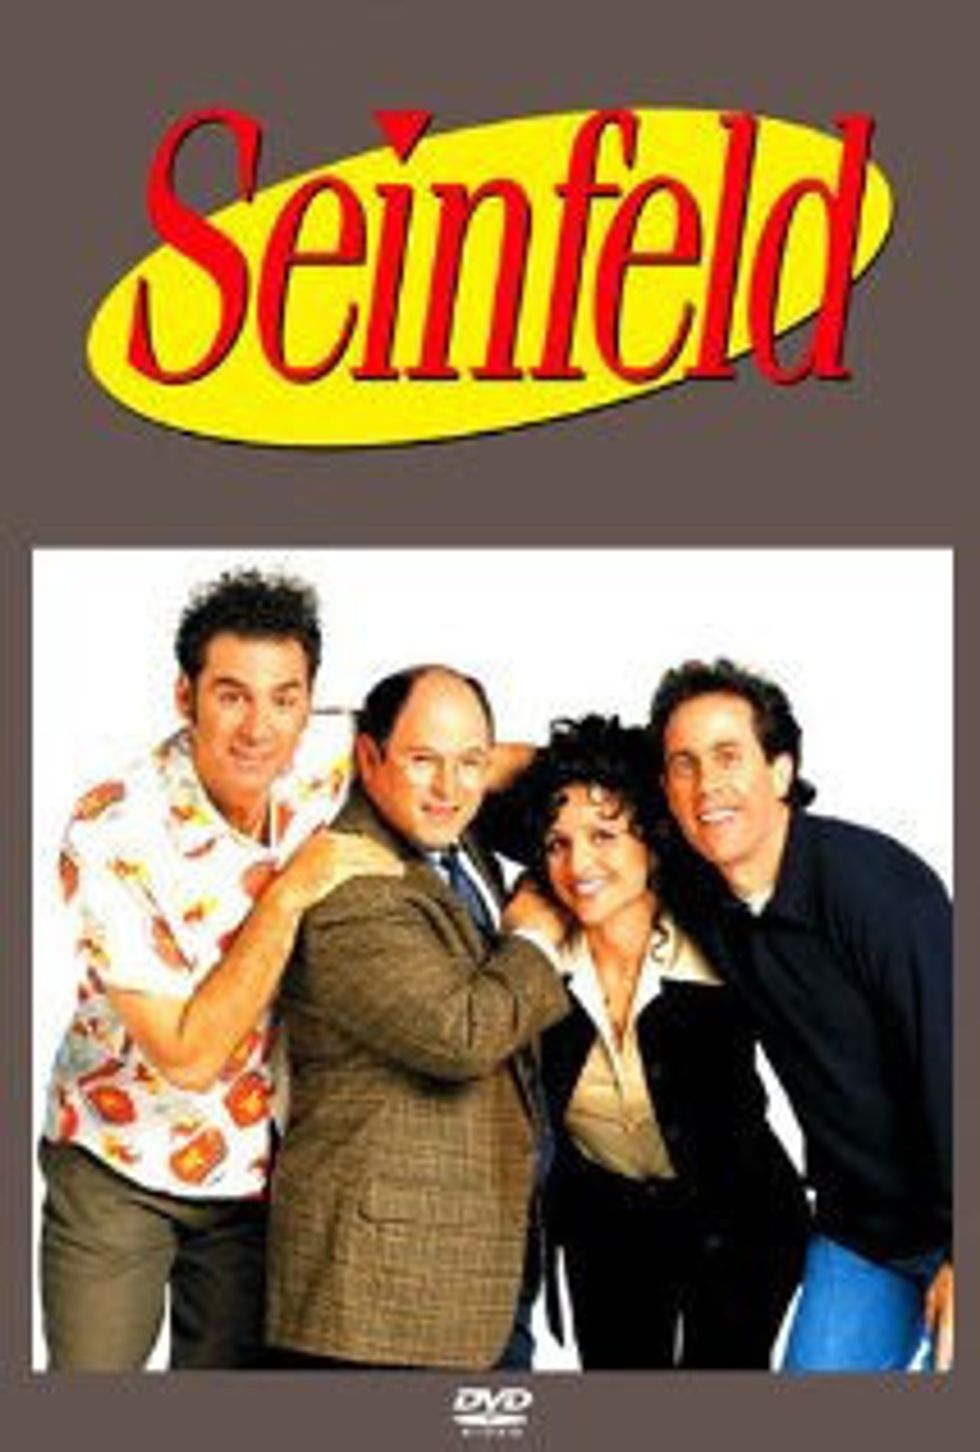 'Seinfeld' Was The Greatest Sitcom Of The 90s, It's A Symbol Of My Childhood